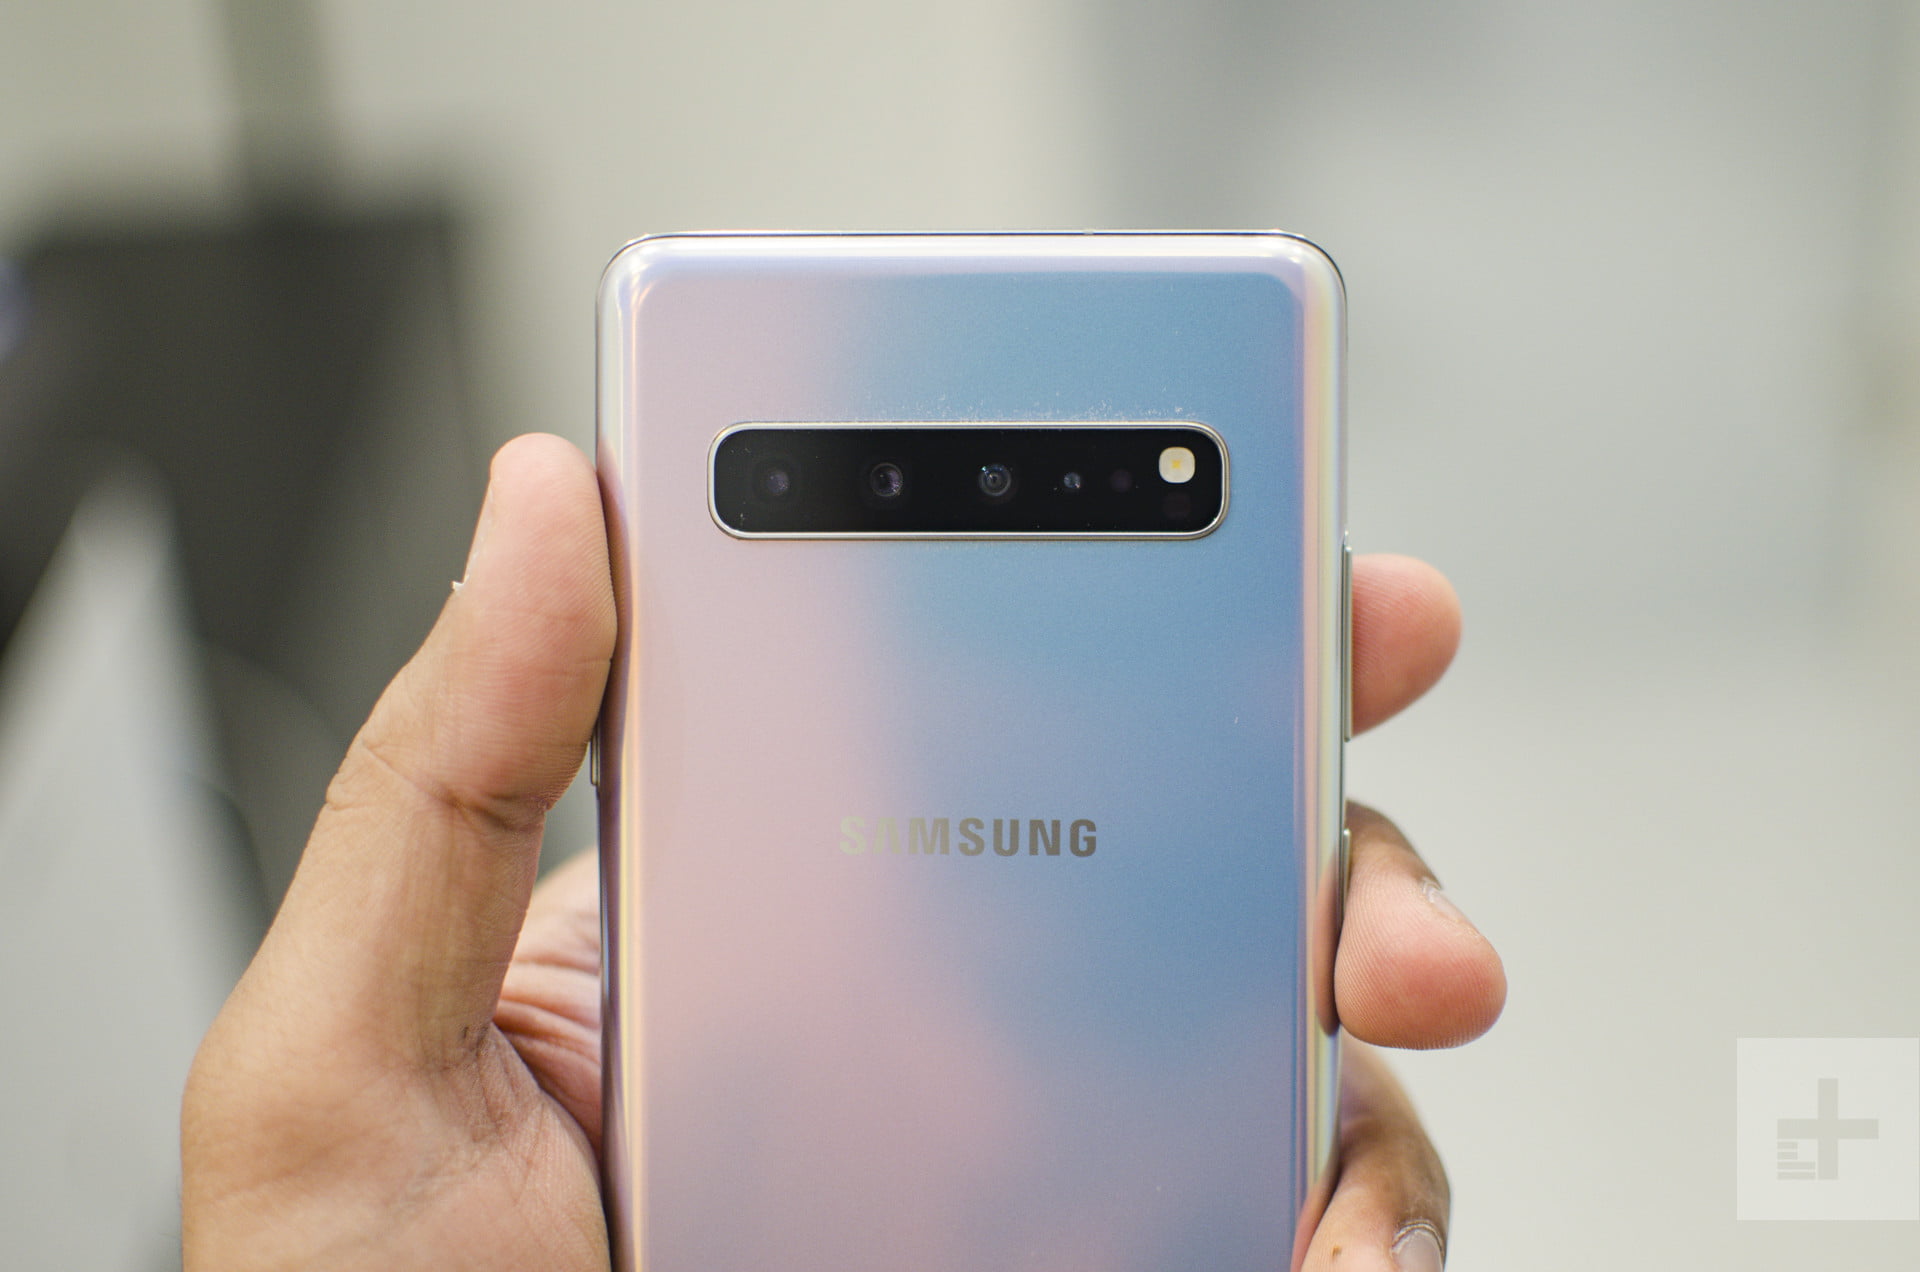 revision samsung galaxy s10 5g hands on 7108 800x534 c